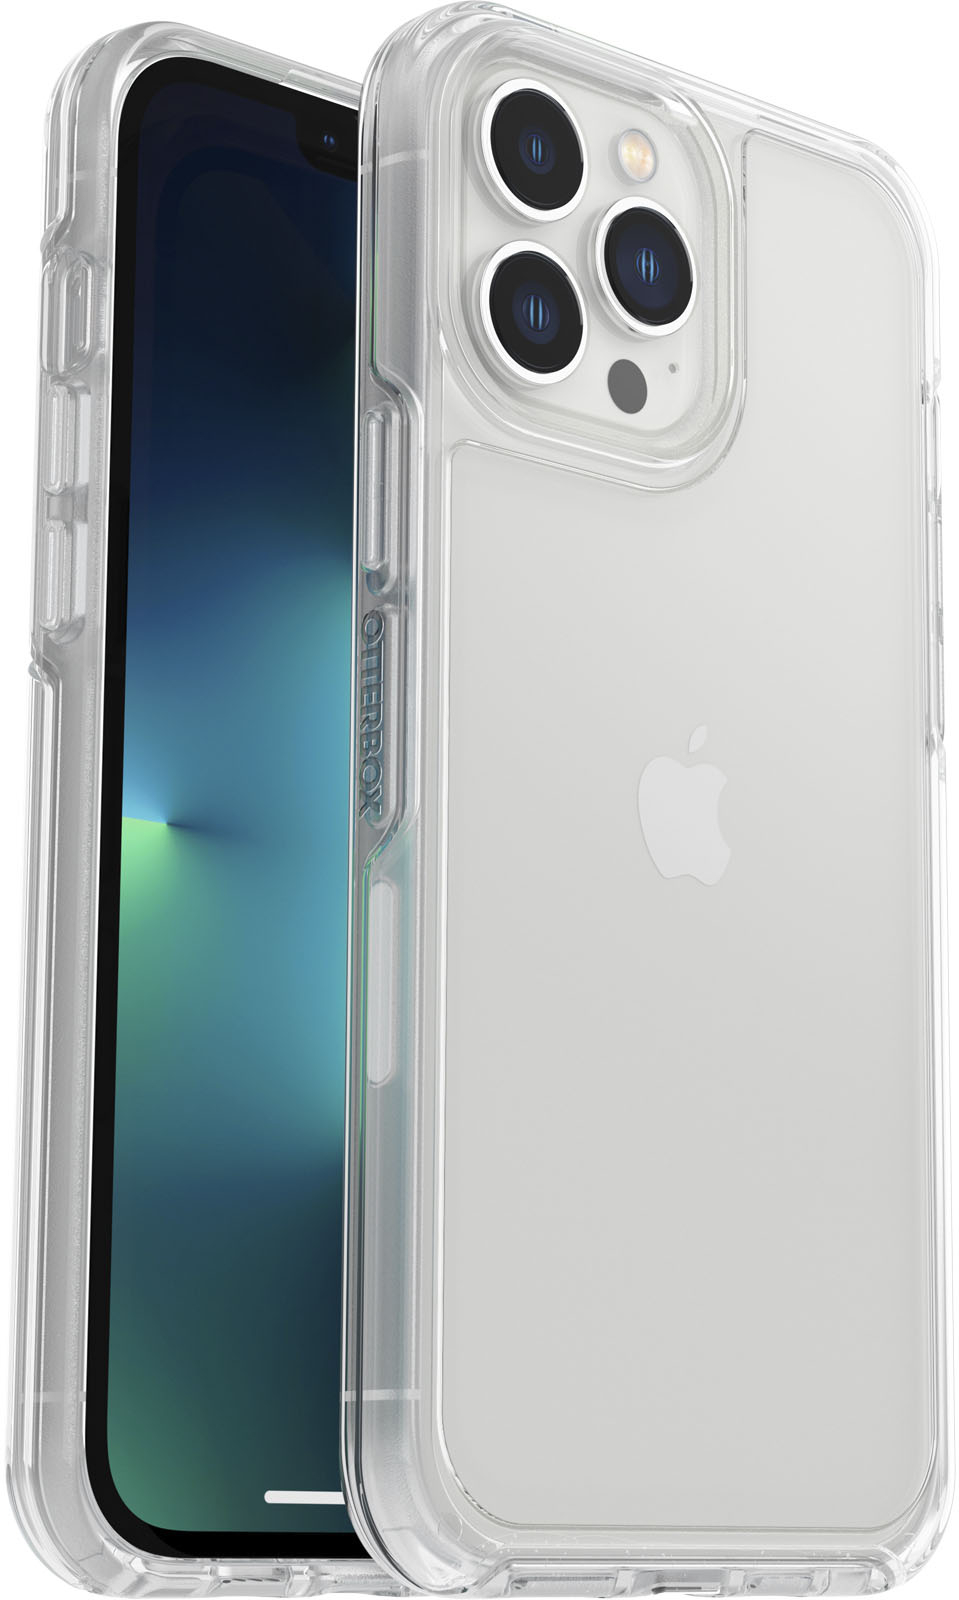 Angle View: OtterBox - Symmetry Series Soft Shell for Apple iPhone 13 Pro Max and iPhone 12 Pro Max - Clear